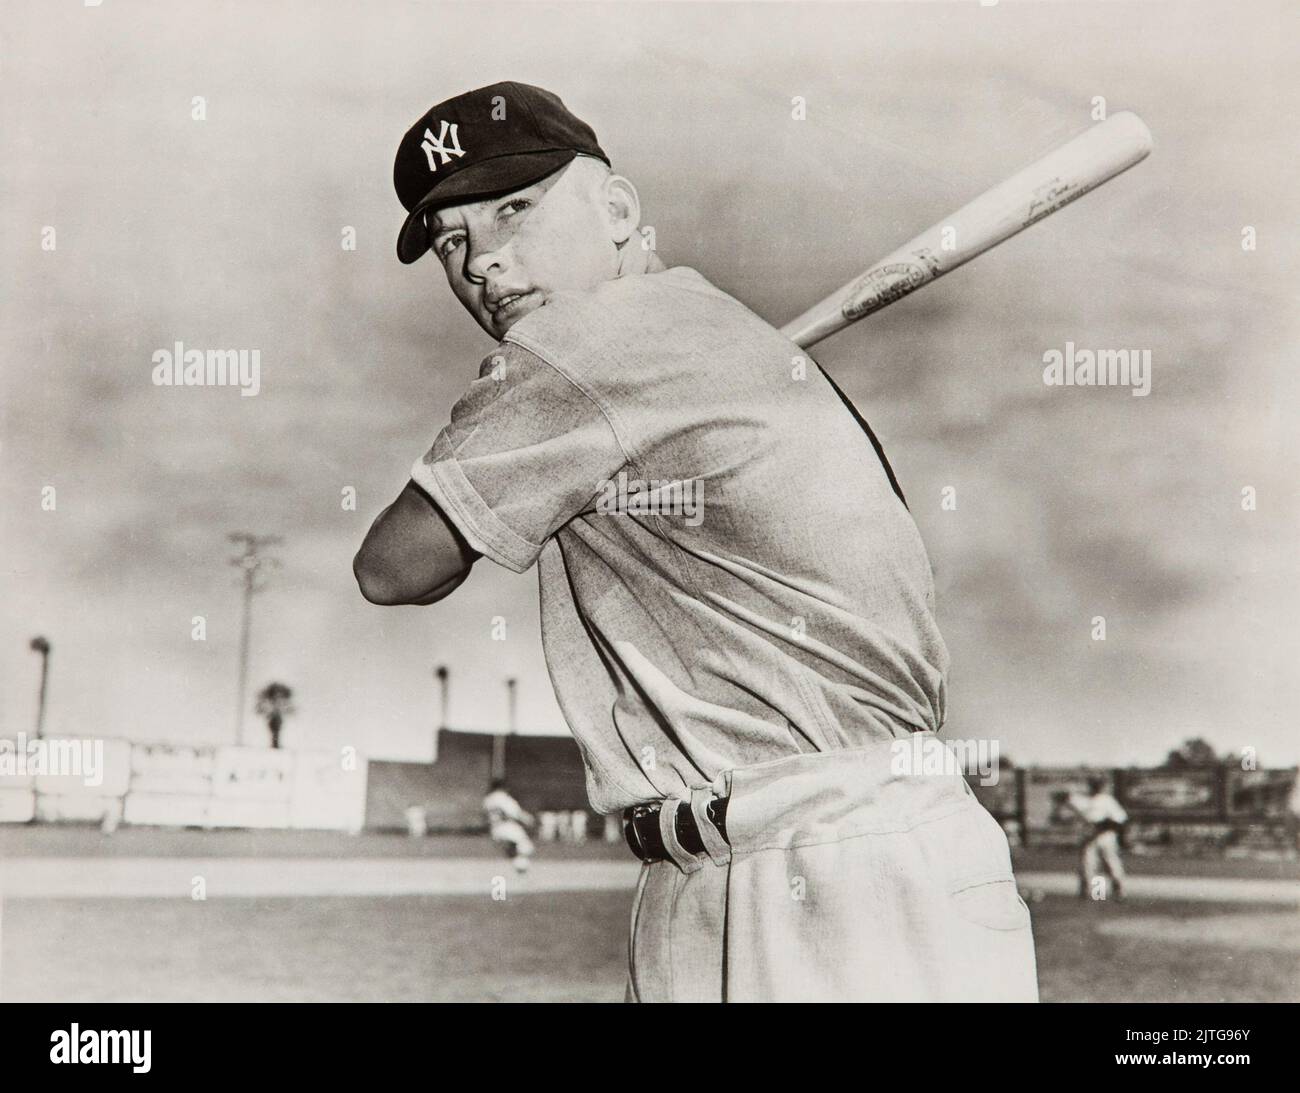 1950s era baseball card depicting Brooklyn Dodgers star player Pee Wee Reese  who was inducted into the Baseball Hall of Fame Stock Photo - Alamy